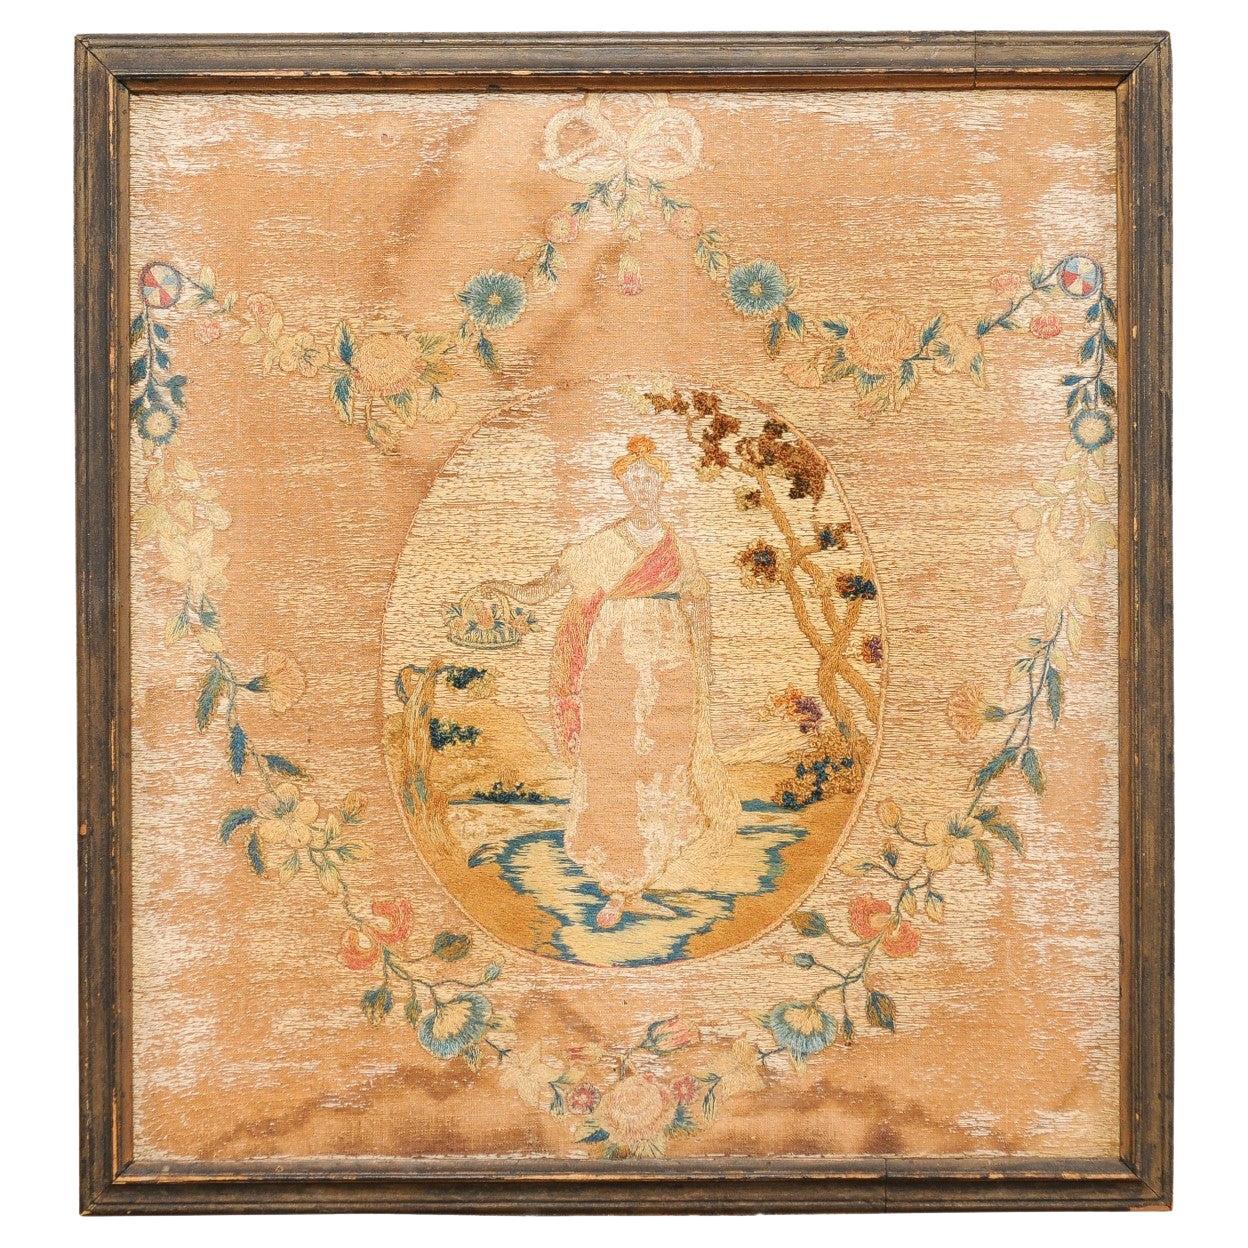  Framed 19th Century English Textile For Sale